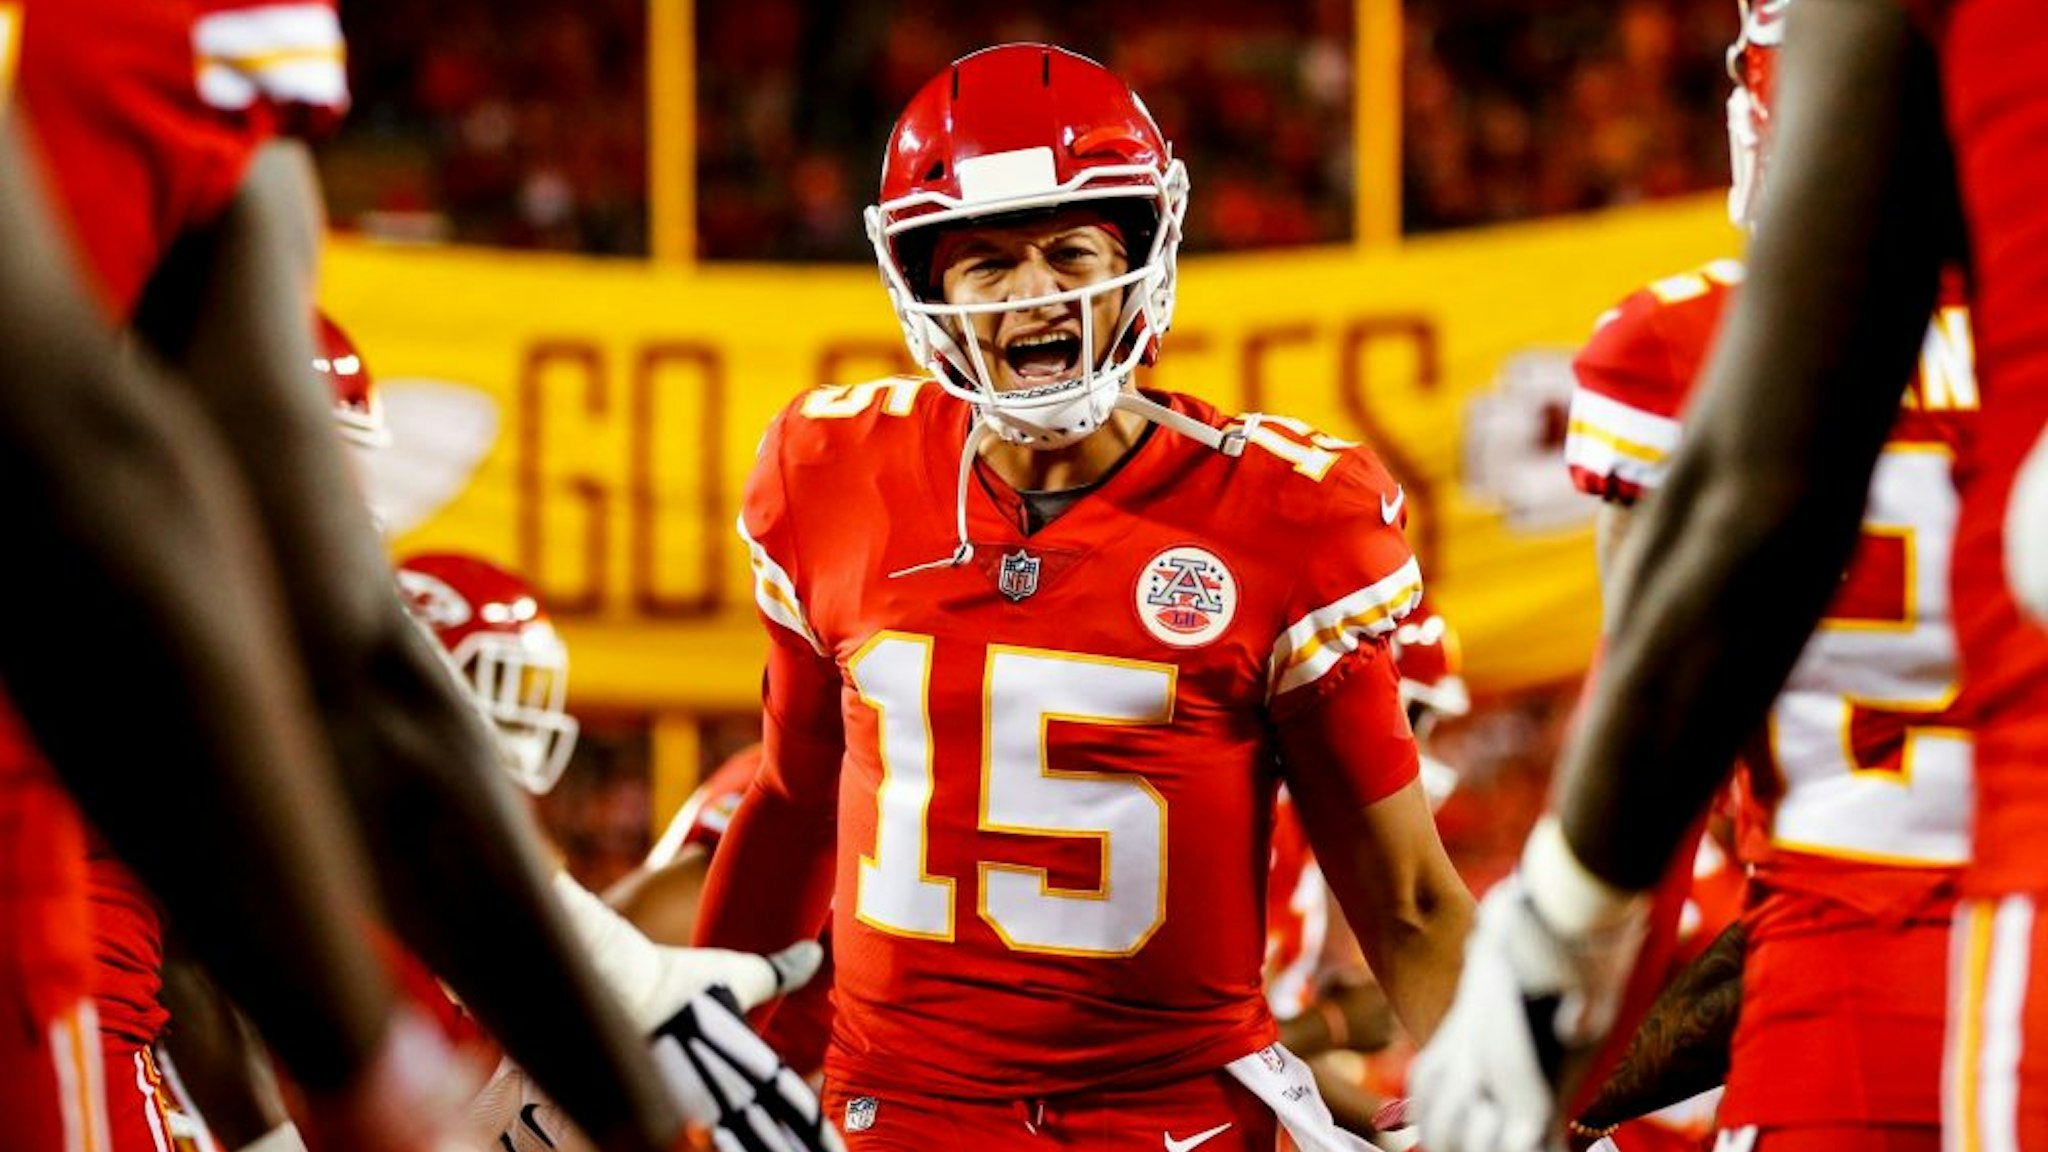 KANSAS CITY, MO - OCTOBER 21: Patrick Mahomes #15 of the Kansas City Chiefs runs through high fives from teammates during pre game introductions prior to the game against the Cincinnati Bengals at Arrowhead Stadium on October 21, 2018 in Kansas City, Kansas.